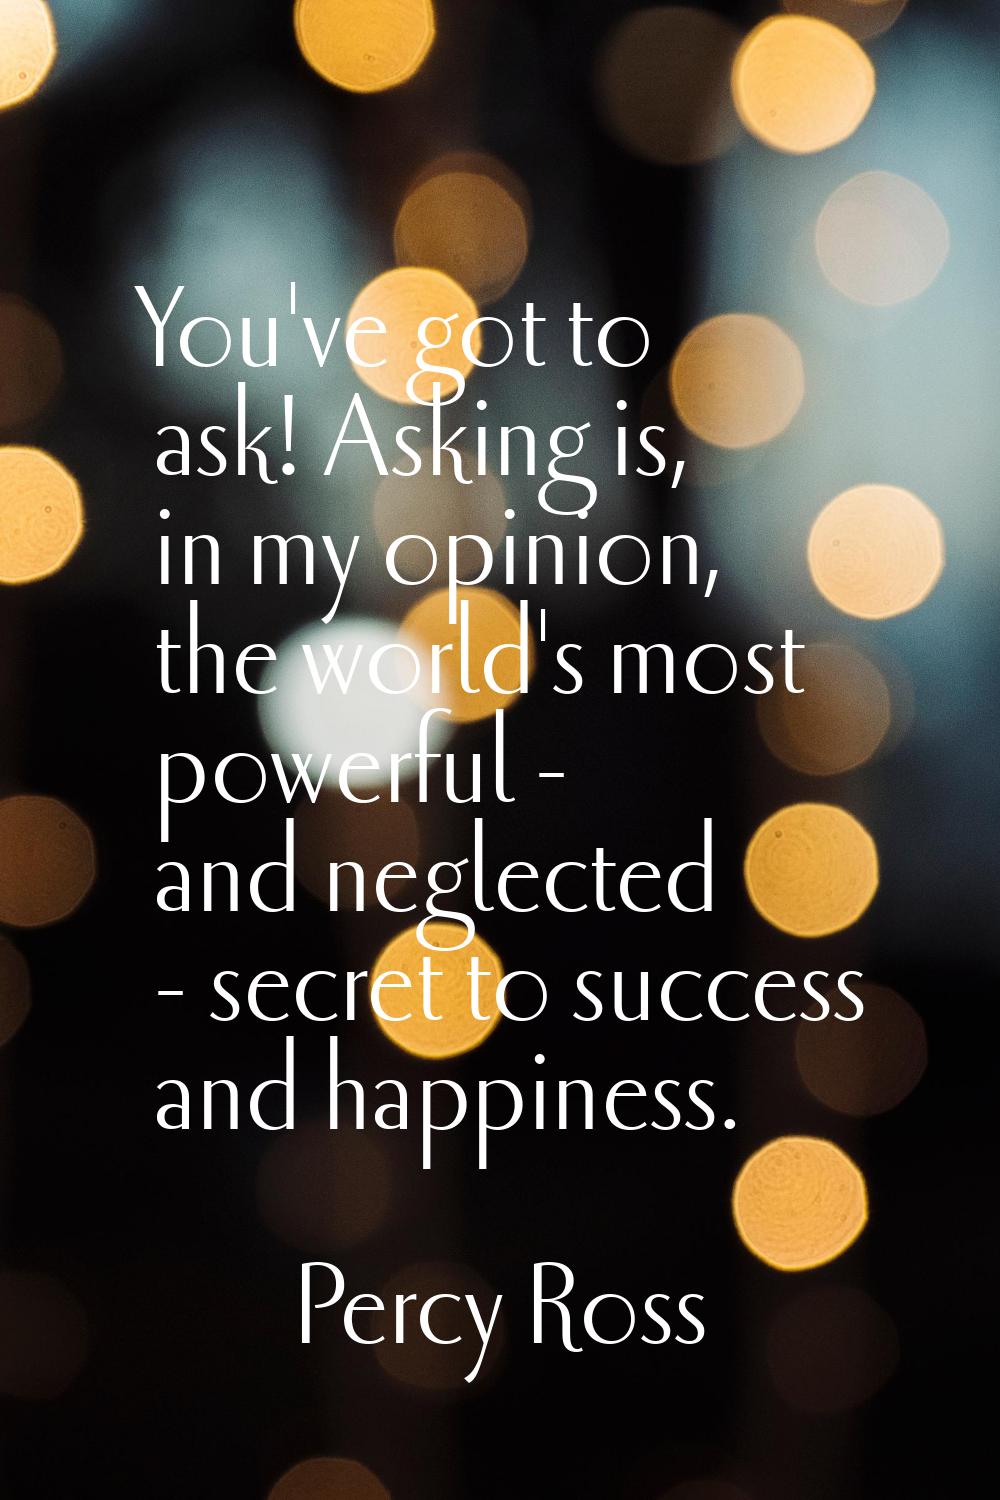 You've got to ask! Asking is, in my opinion, the world's most powerful - and neglected - secret to 